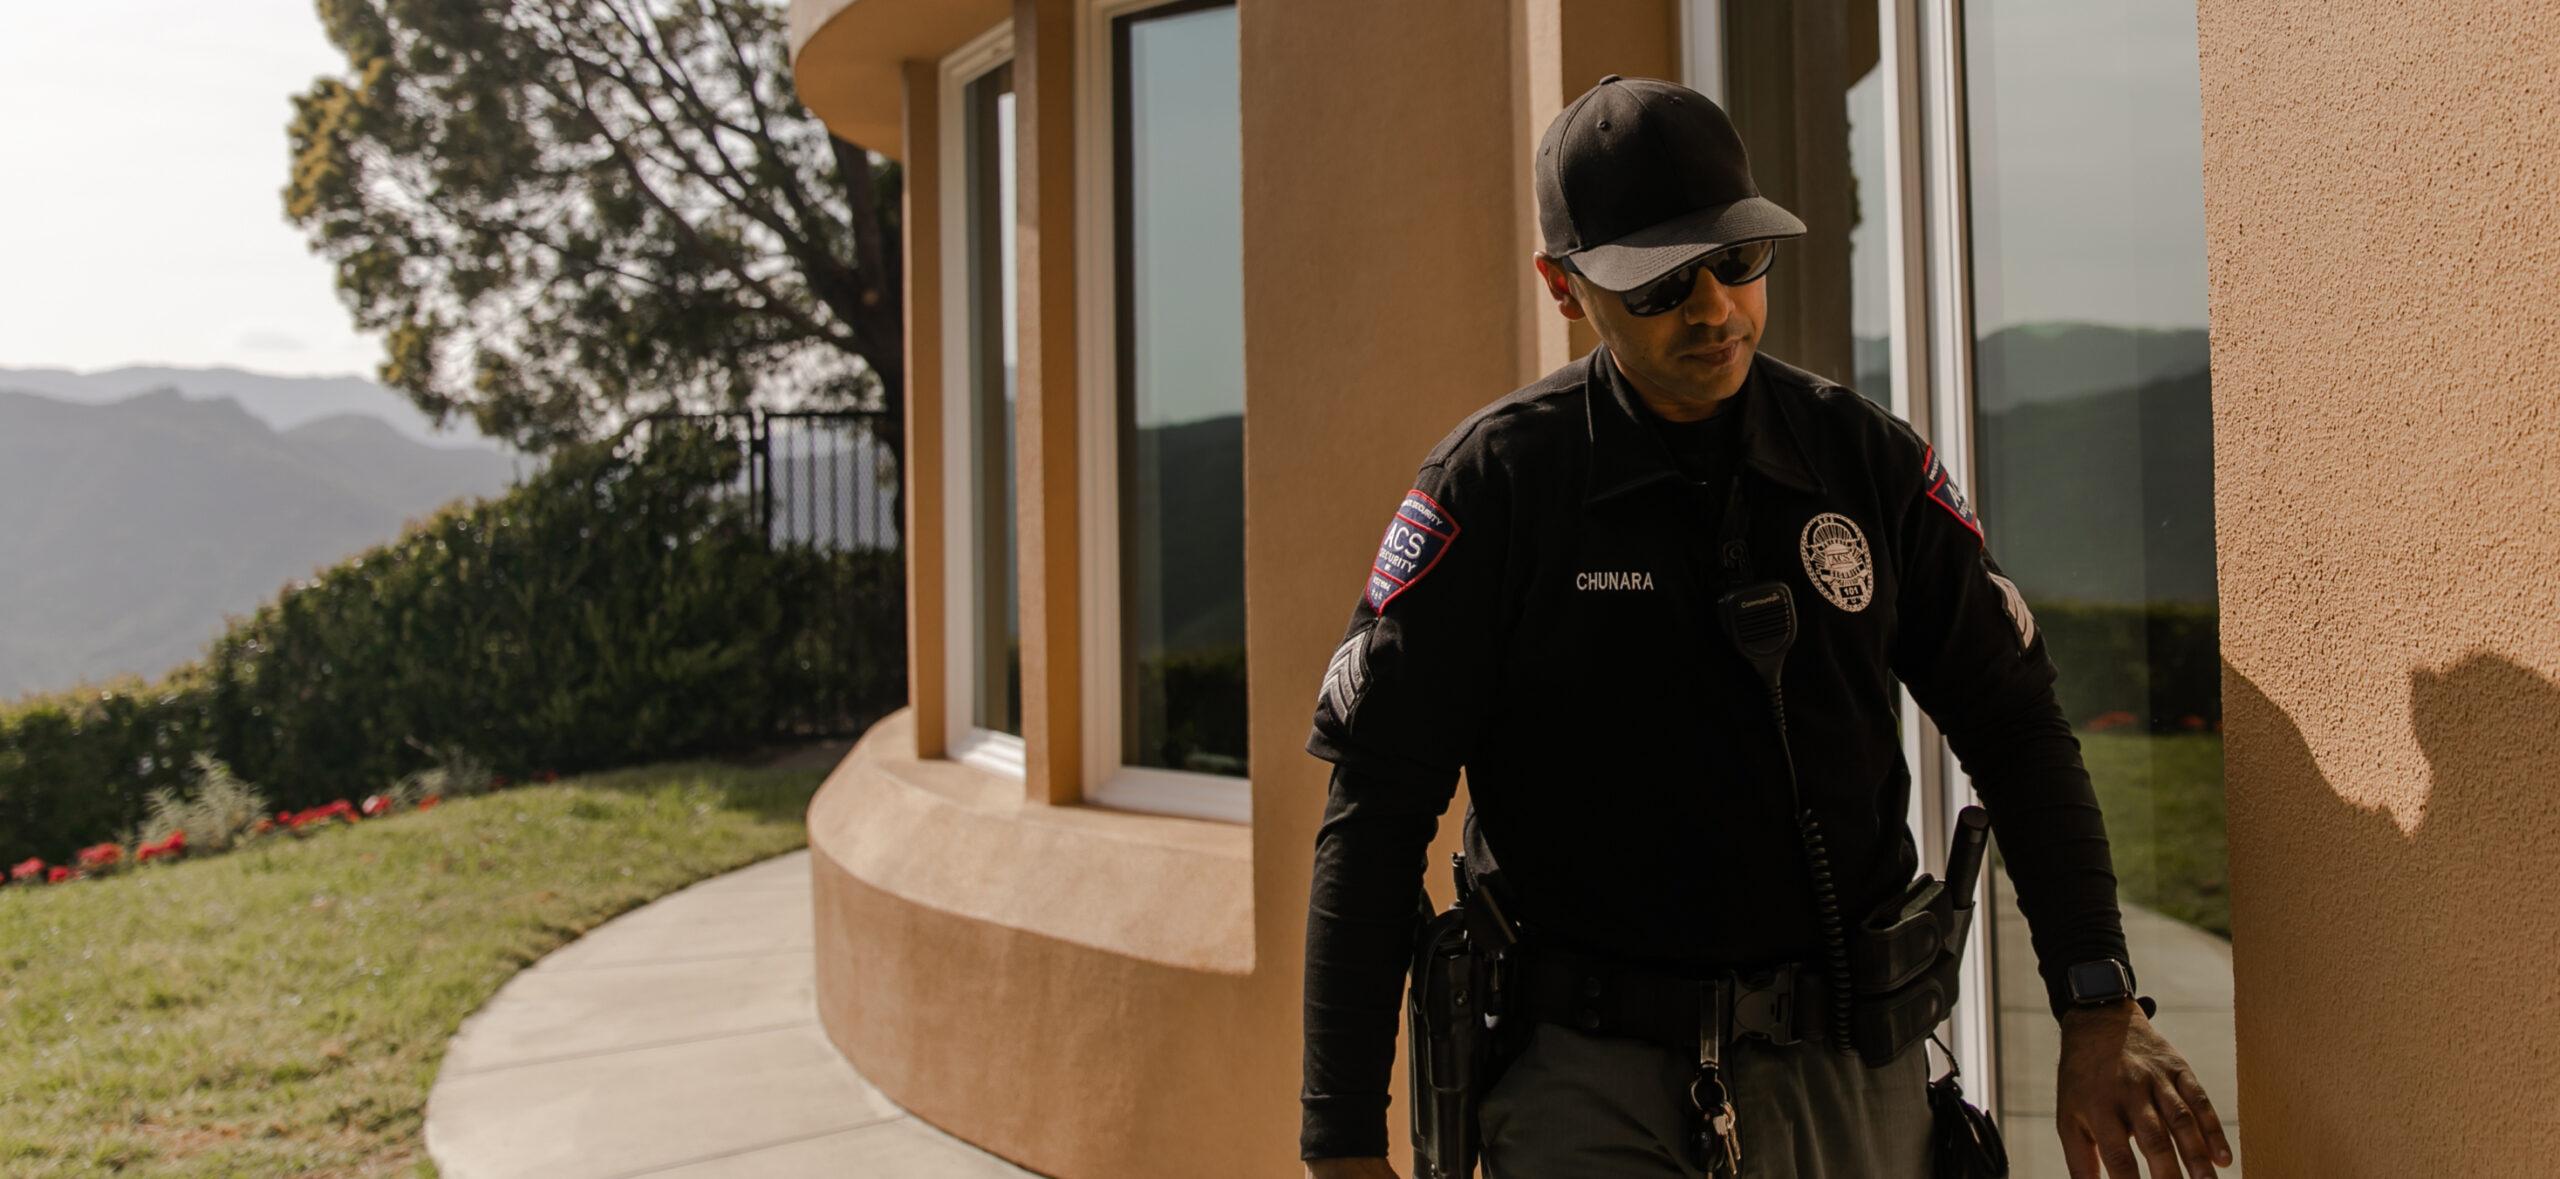 Product Security Patrol Services in Los Angeles | Explore Community & Residential Security Guard & Patrol Services - ACS Security image